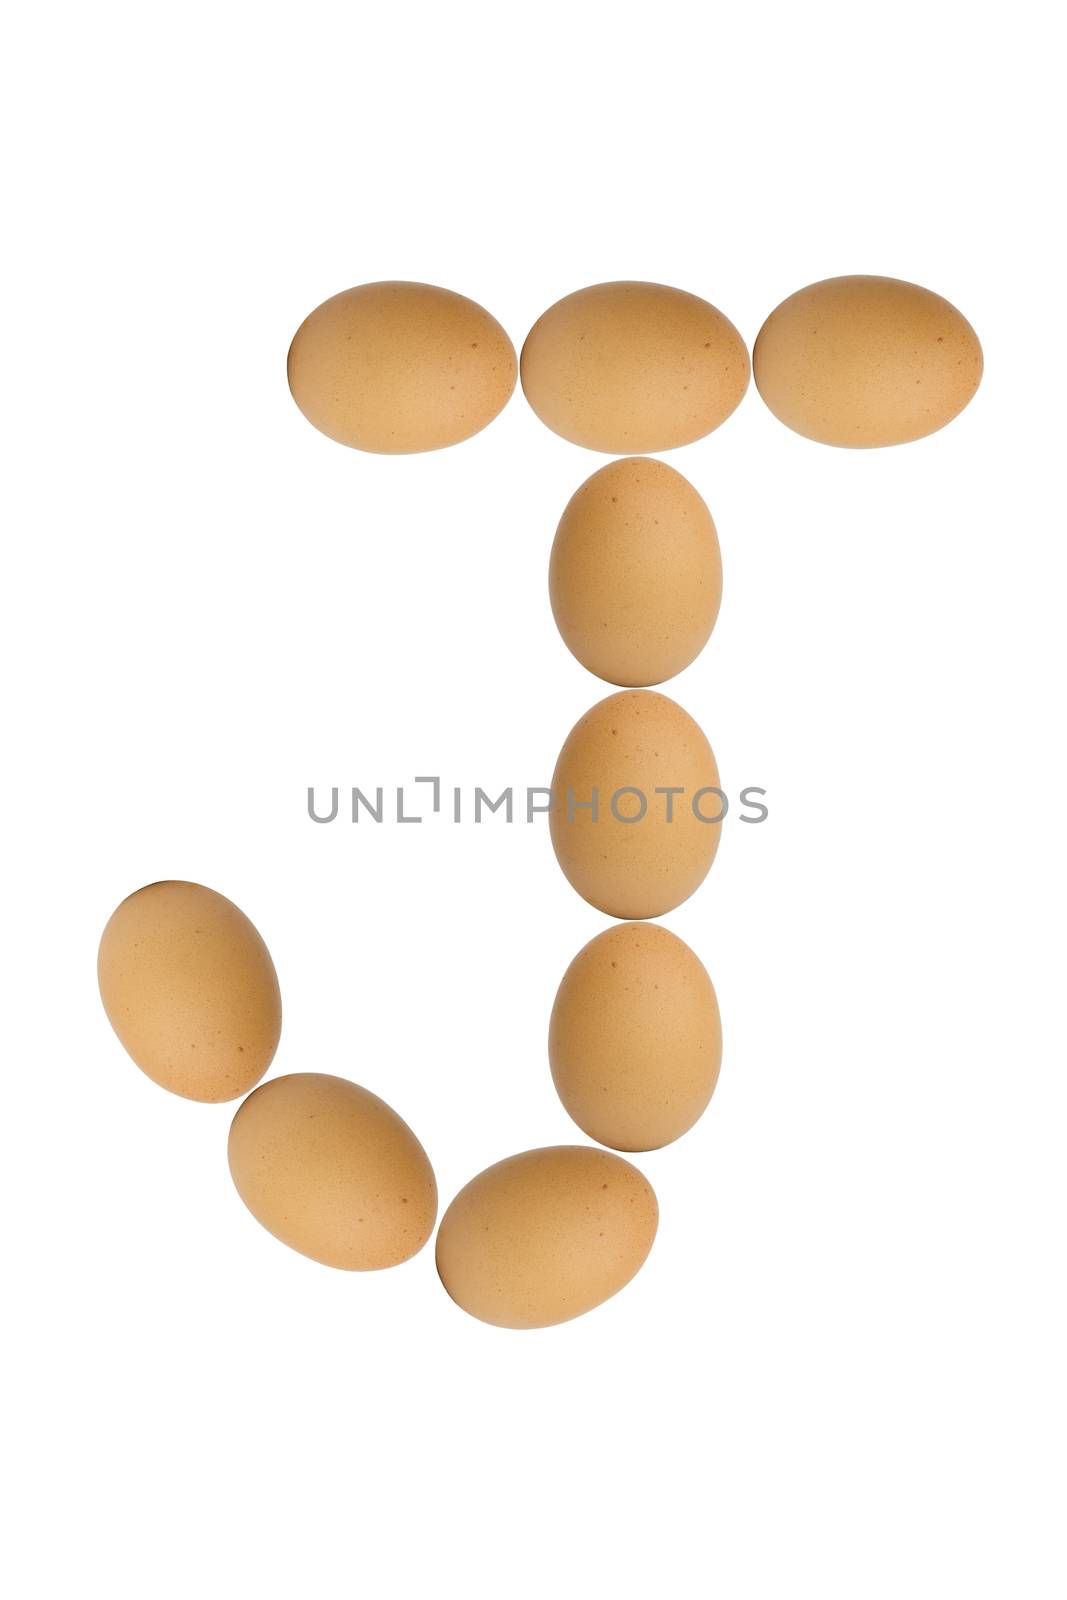 Alphabets  A to Z from brown eggs alphabet isolated on white background, J